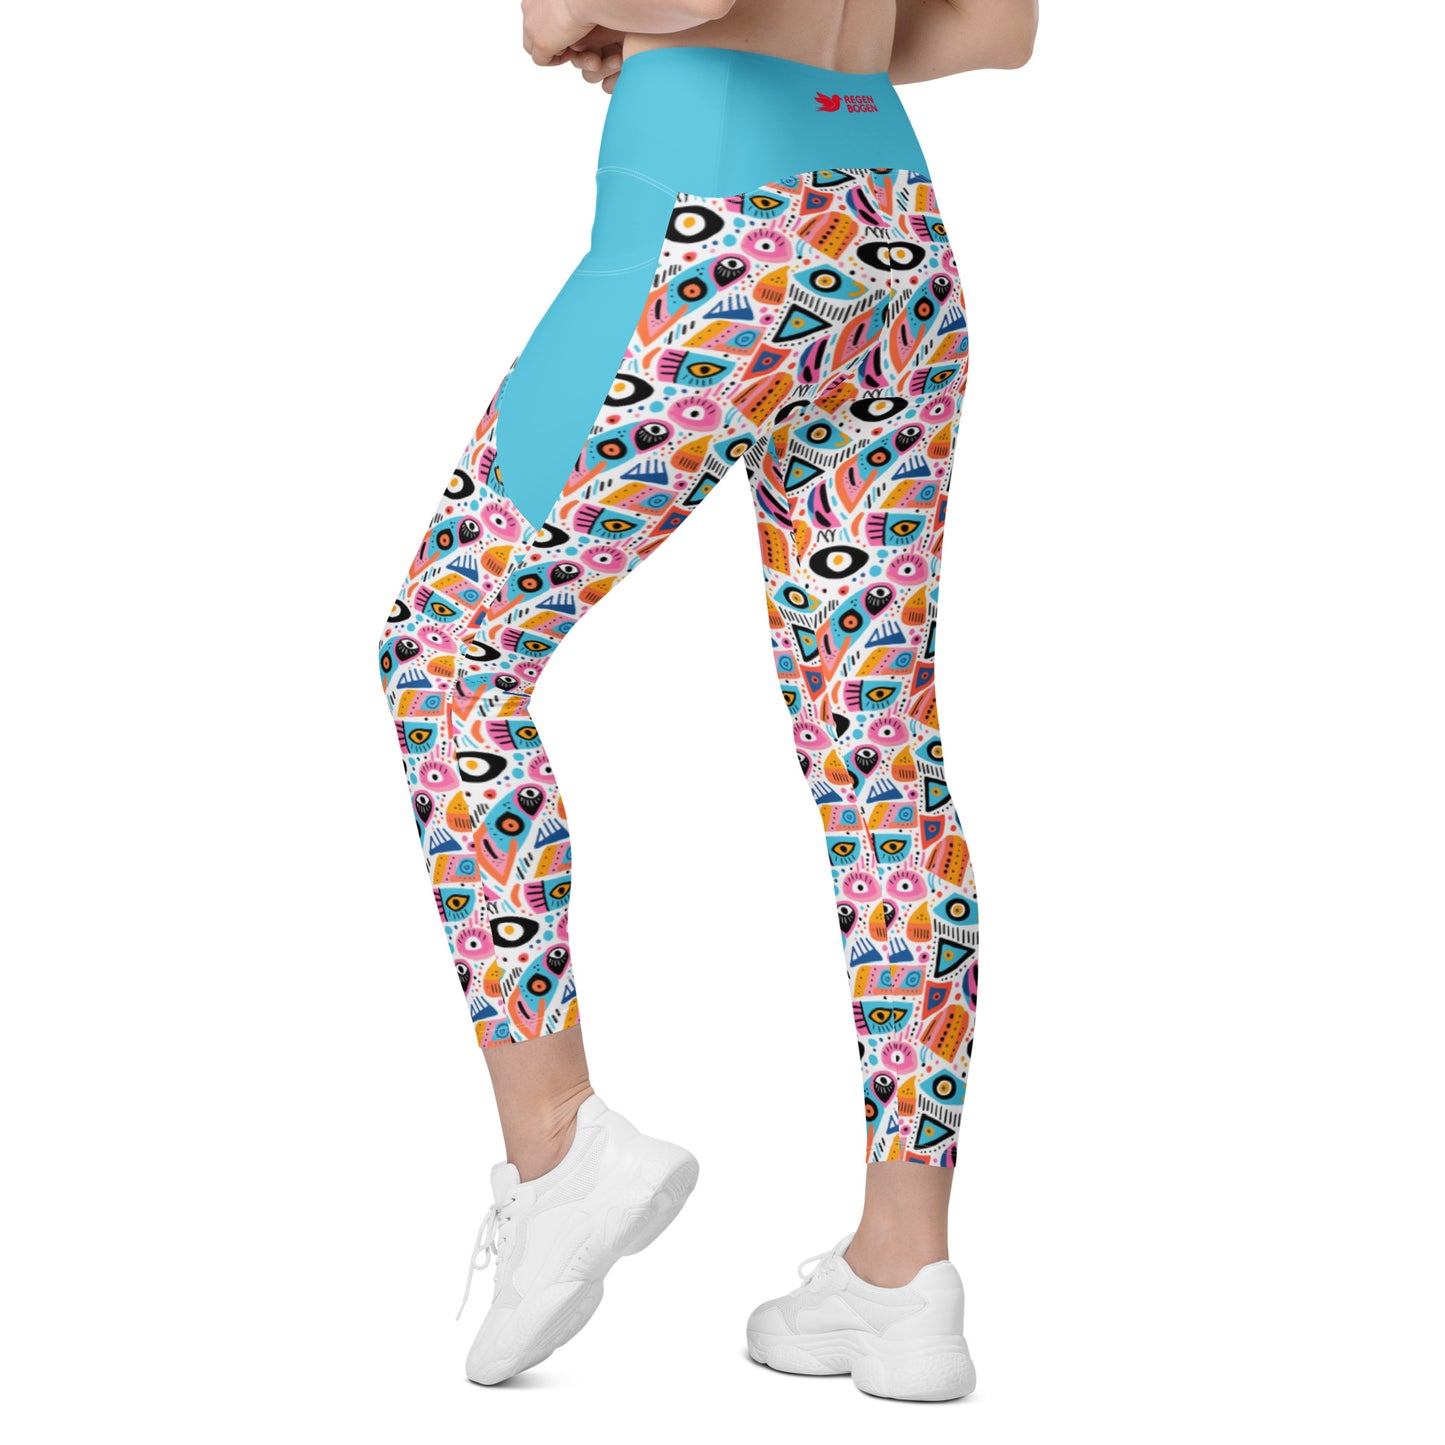 Malocchio High Waist 7/8 Recycled Yoga Leggings / Yoga Pants with Pockets